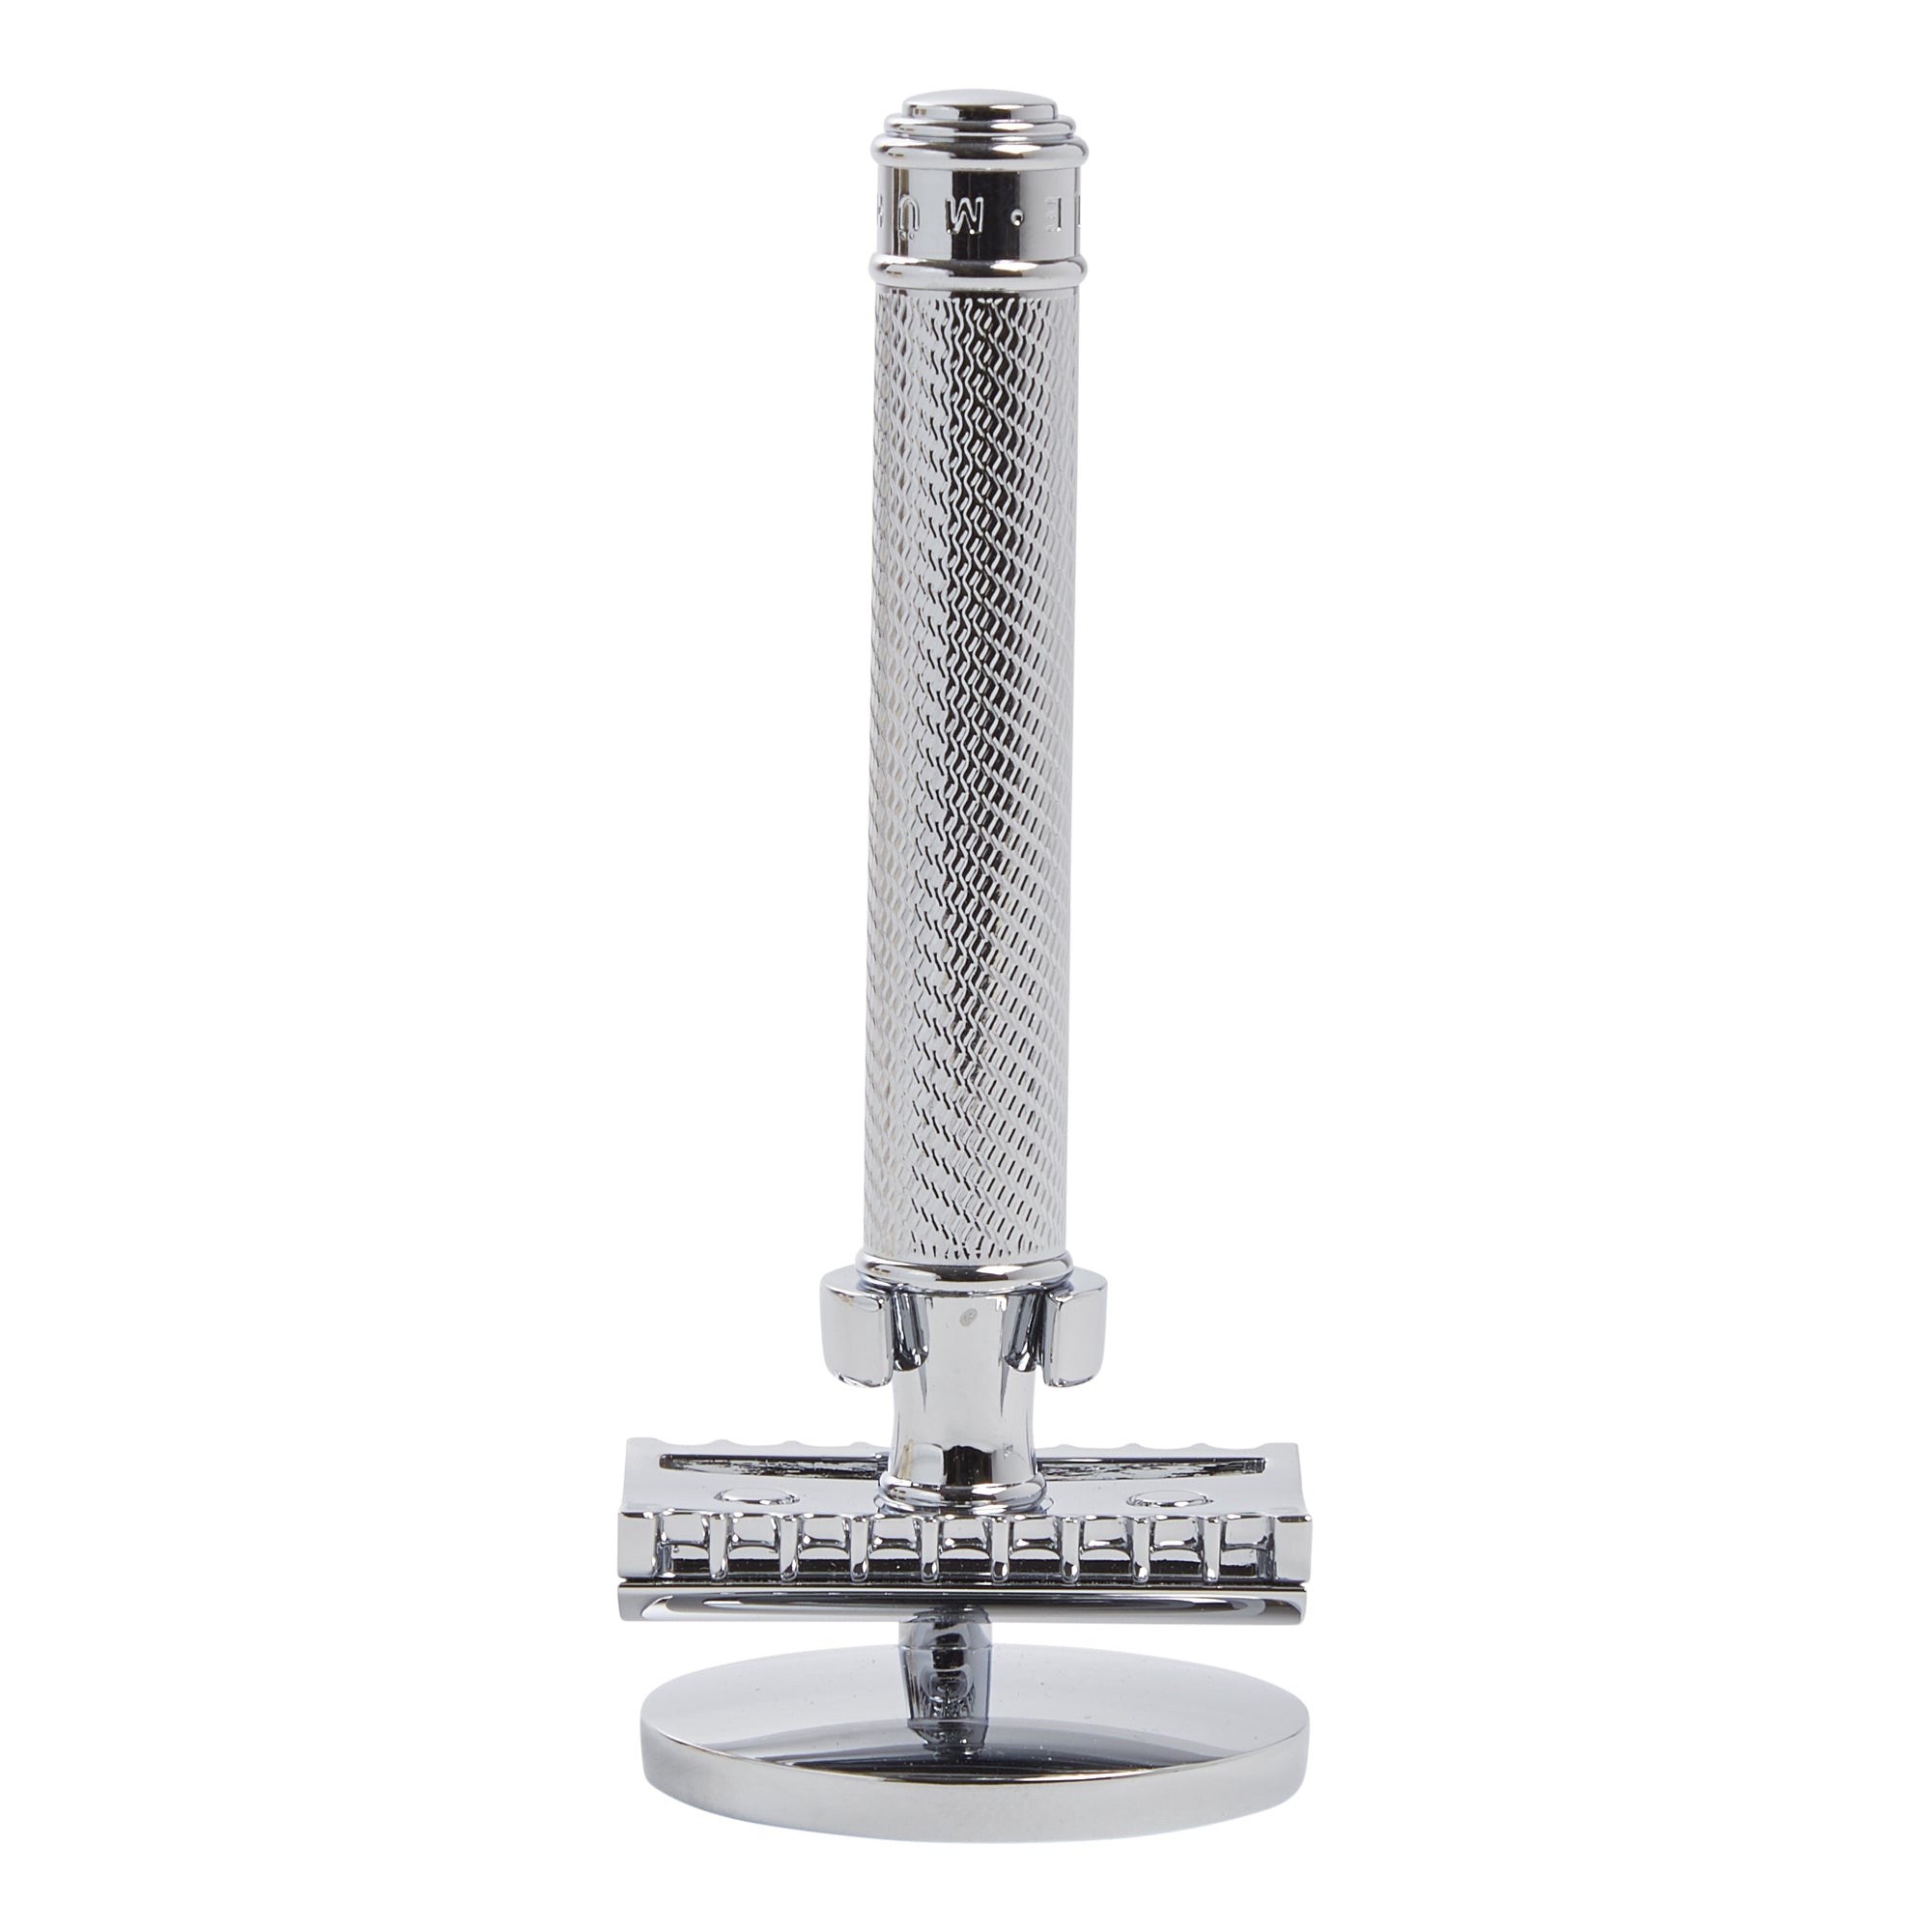 A Muhle Safety Razor Stand from KirbyAllison.com, made of stainless steel, on a white background, displayed with an elegant man's bathroom aesthetic.